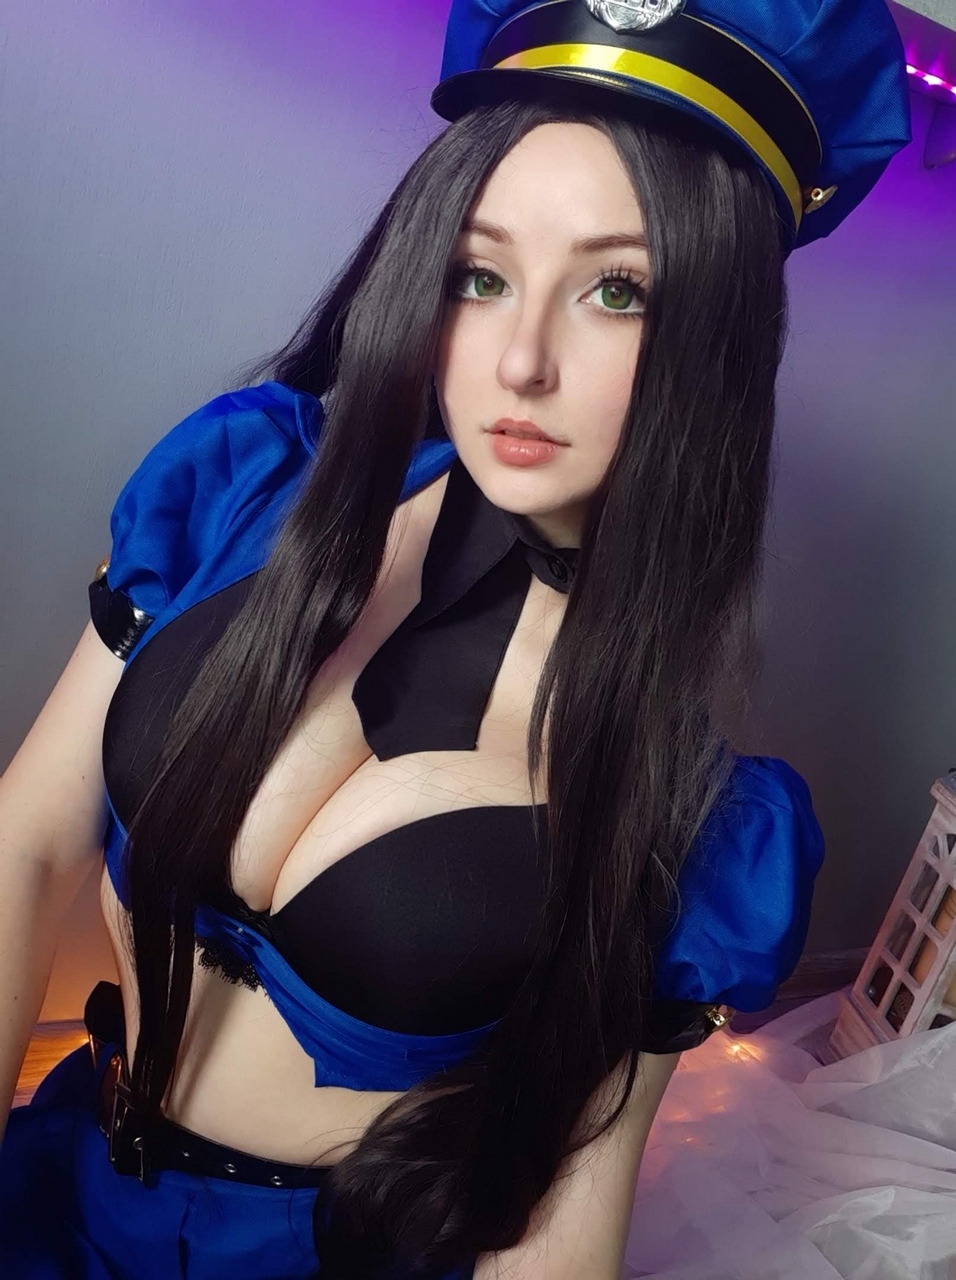 Officer Caitlyn From League Of Legends By Namine